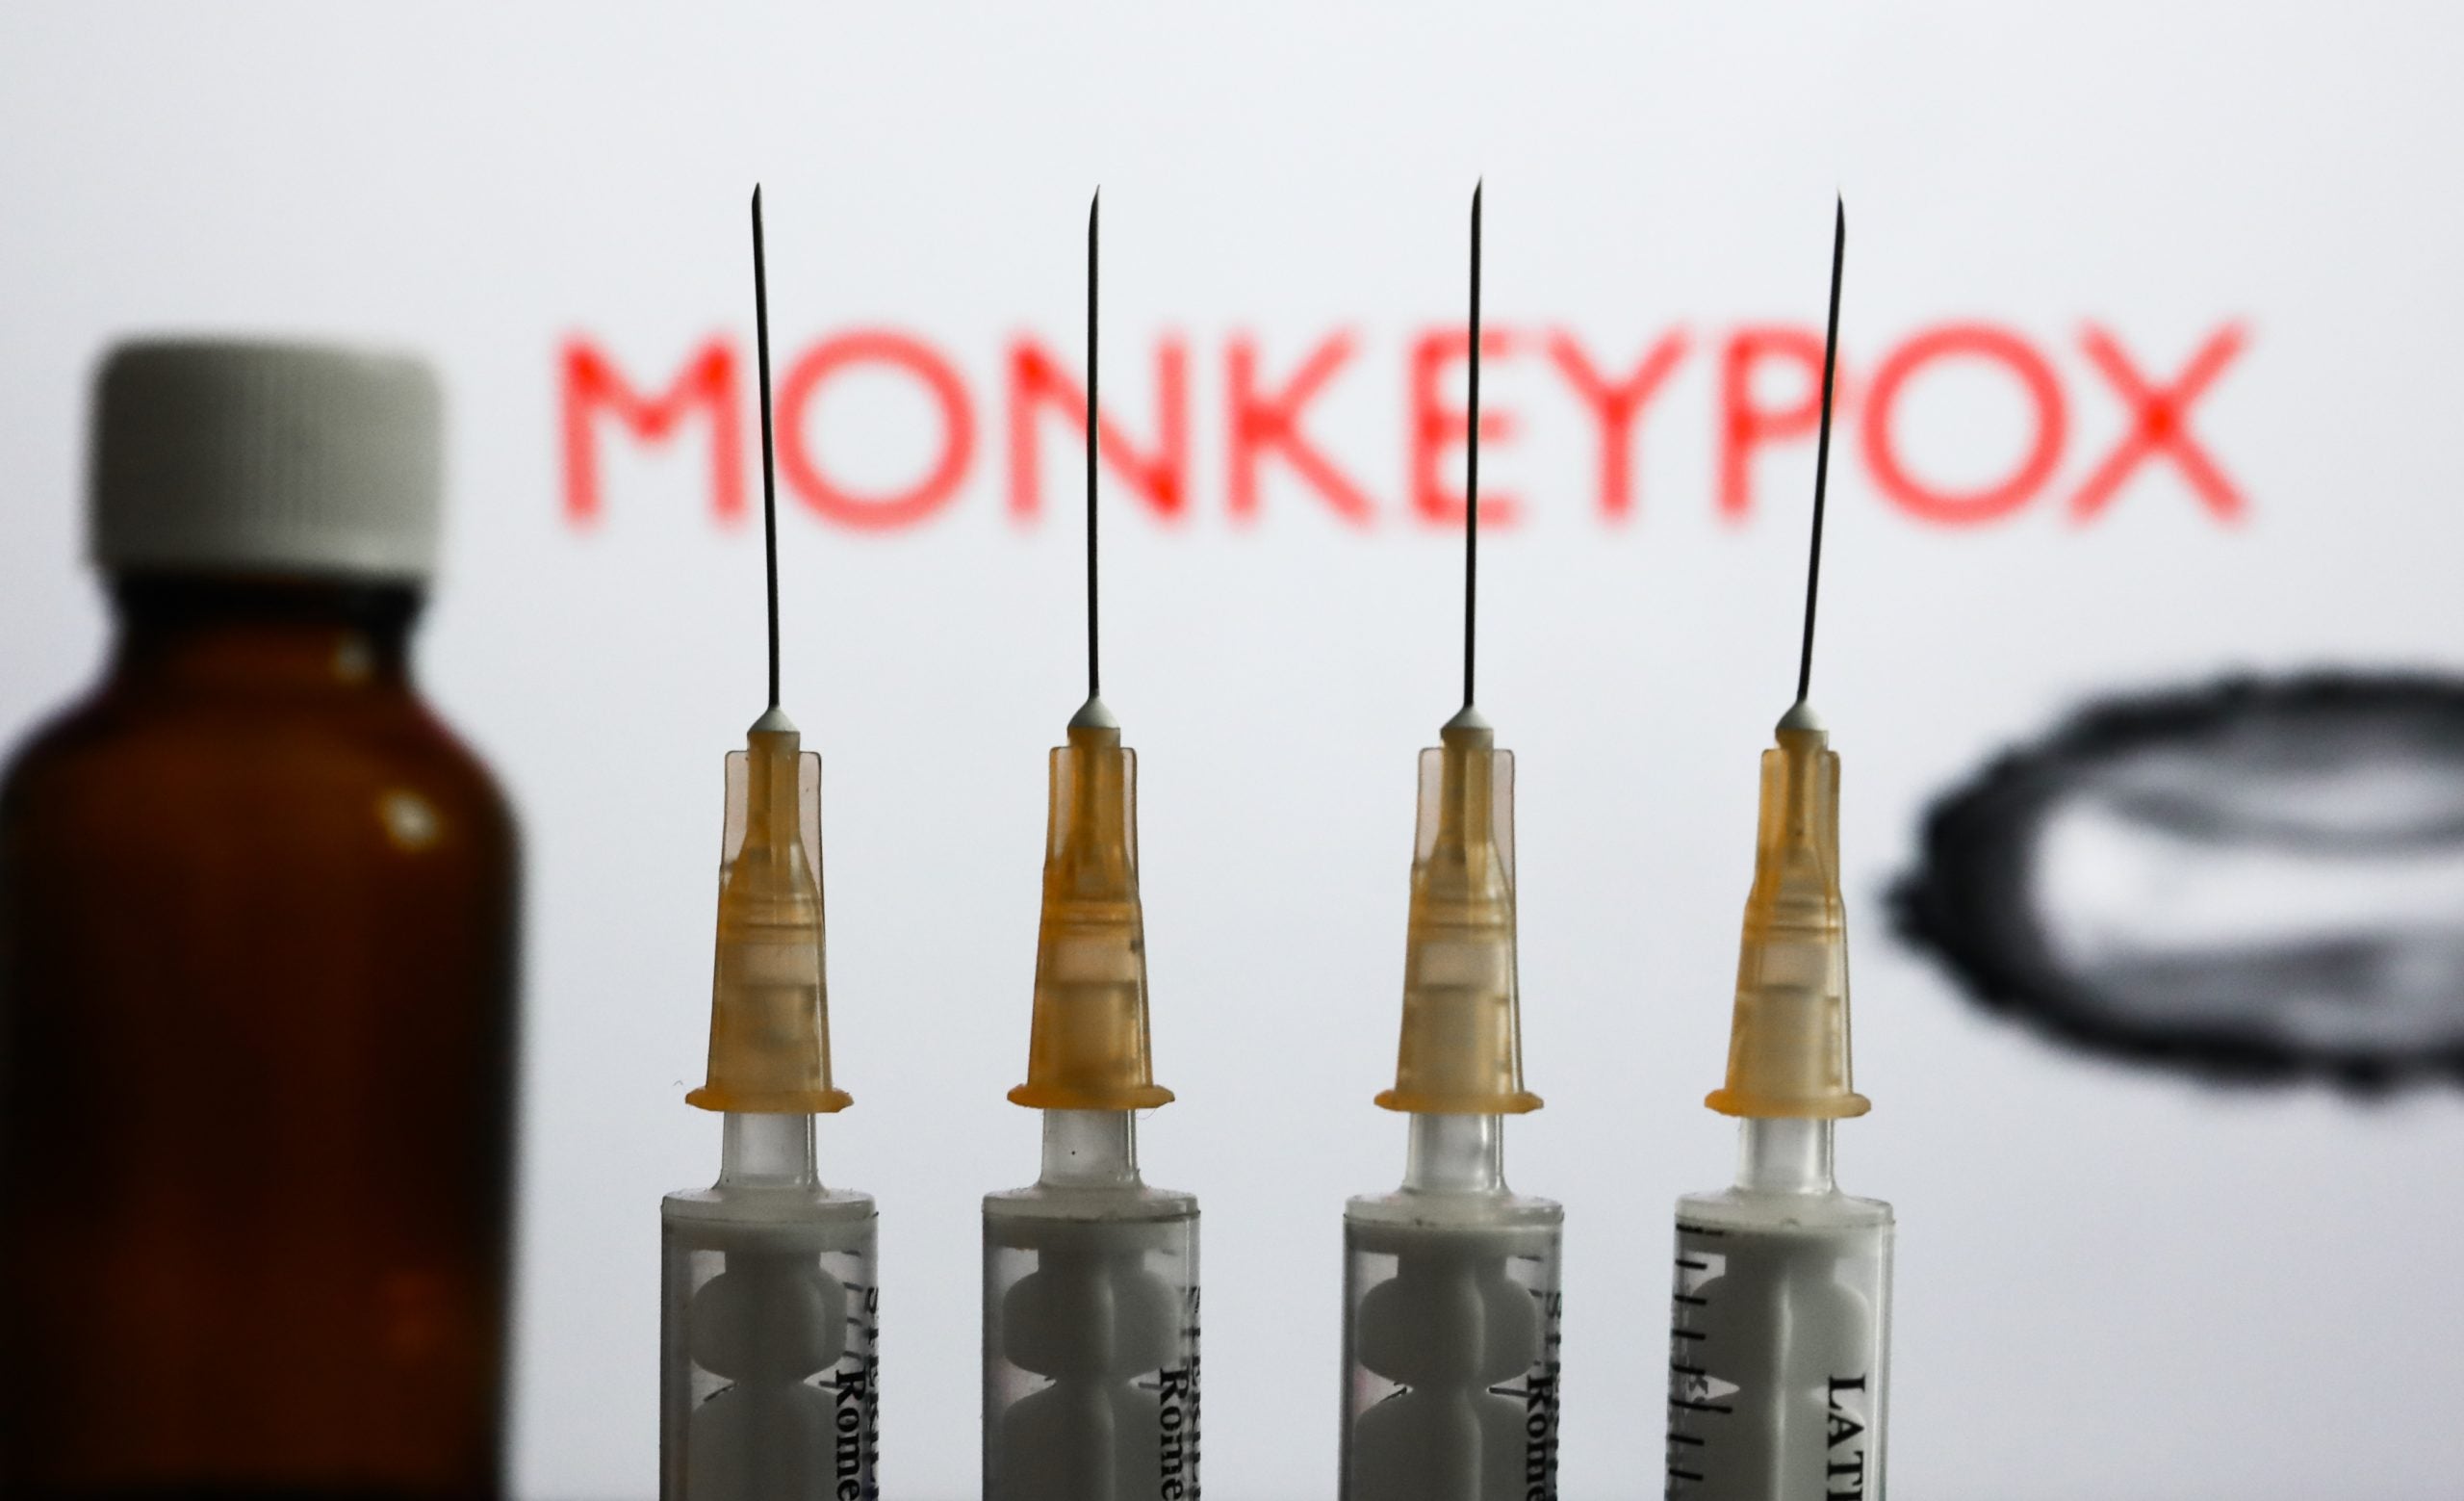 Monkeypox Is Getting A New Name After Worries Current One Is 'Discriminatory' And 'Stigmatizing'